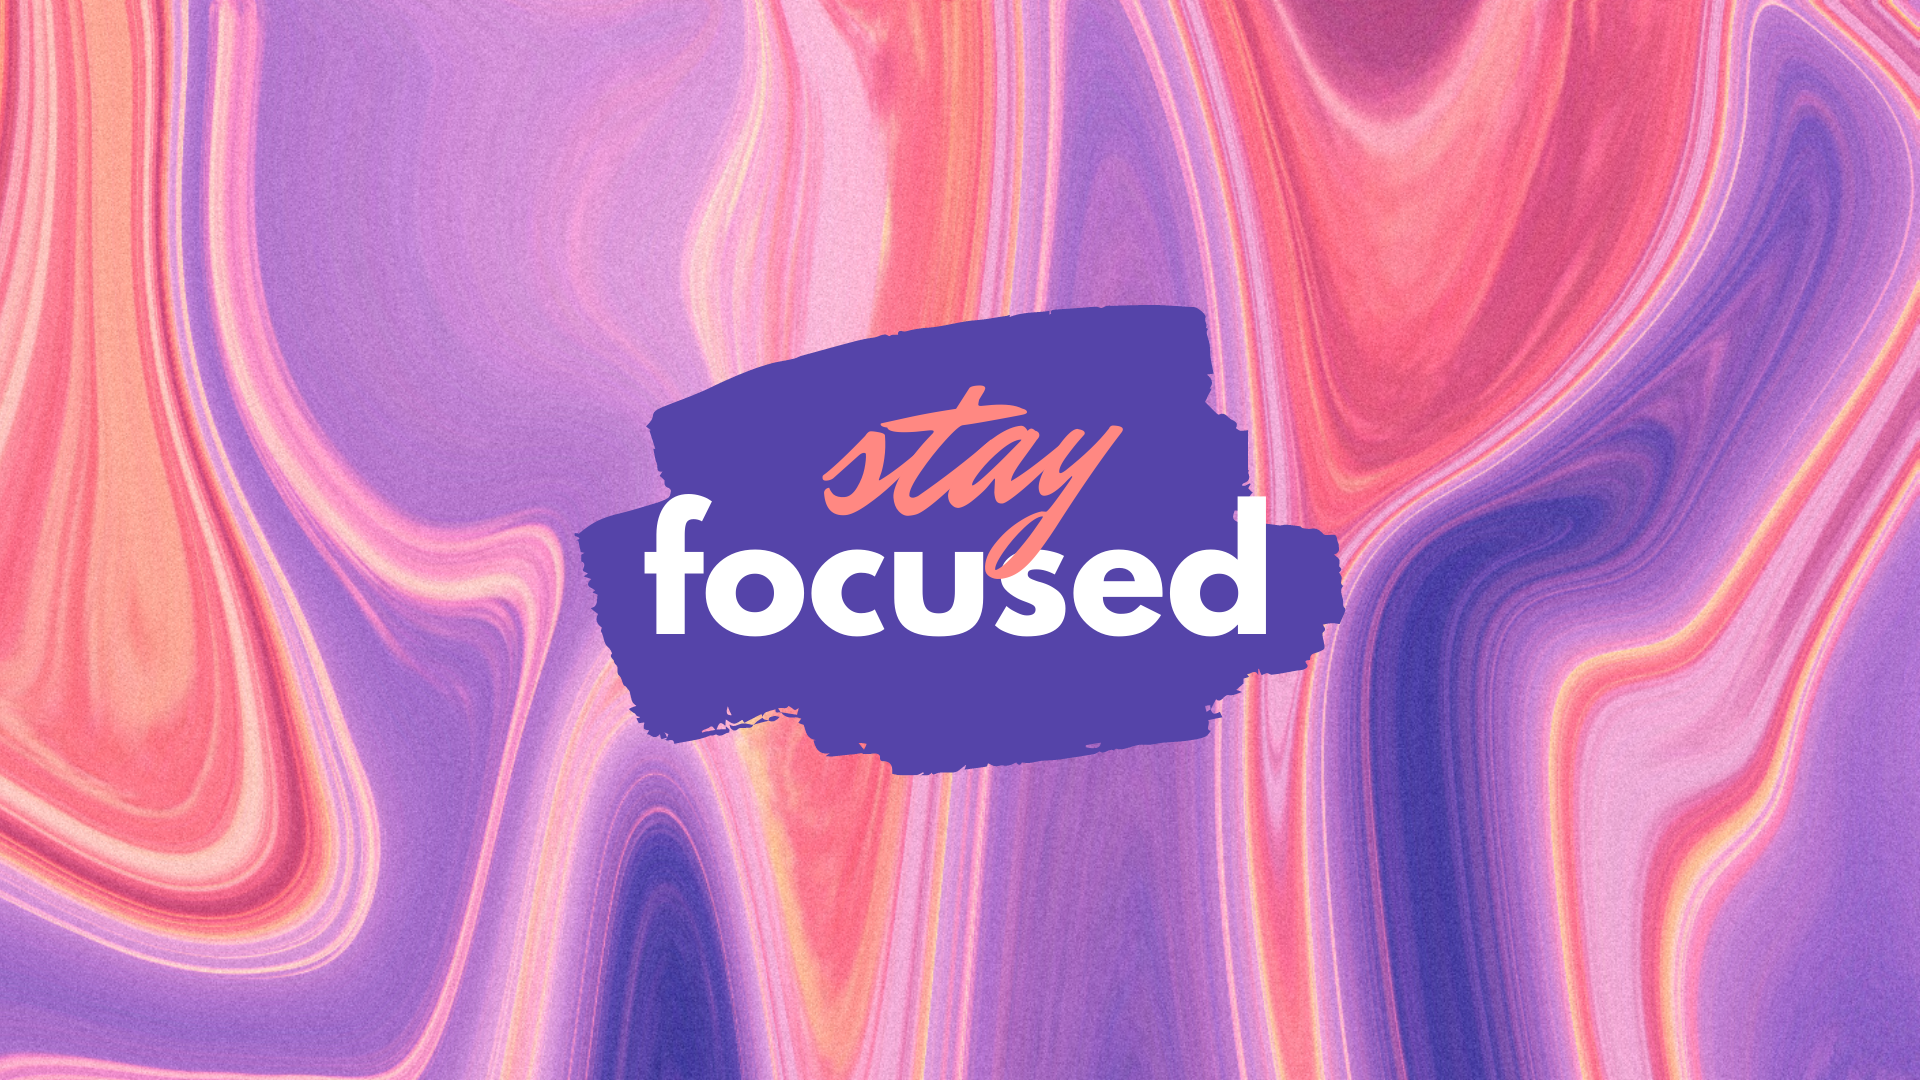 Stay Focused. Sassy wallpaper, iPhone background wallpaper, Aesthetic wallpaper